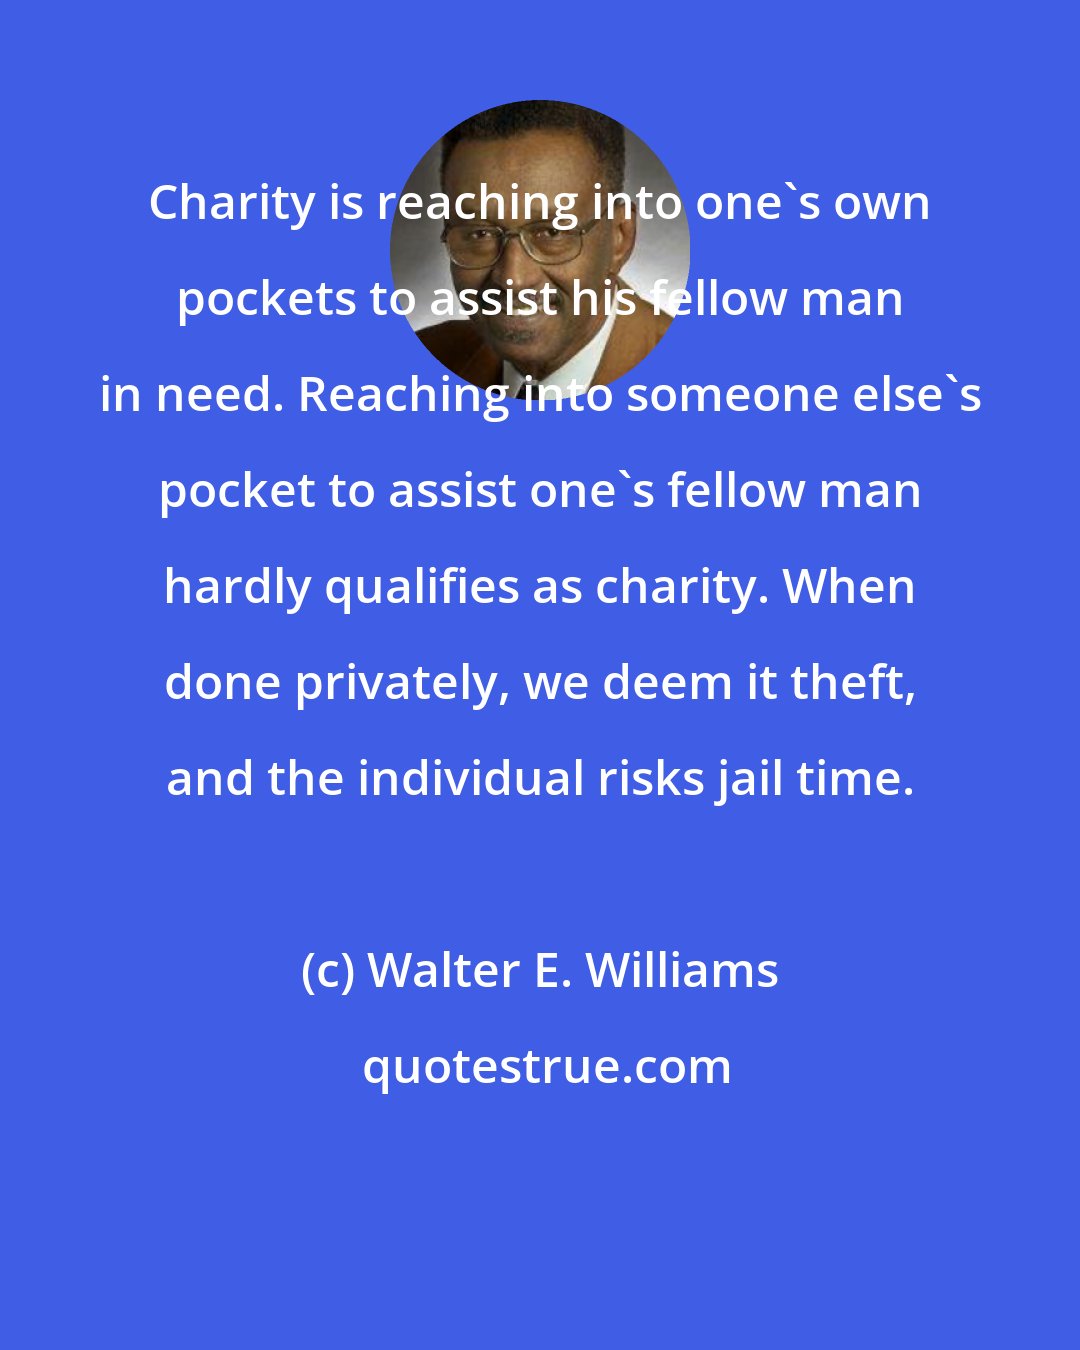 Walter E. Williams: Charity is reaching into one's own pockets to assist his fellow man in need. Reaching into someone else's pocket to assist one's fellow man hardly qualifies as charity. When done privately, we deem it theft, and the individual risks jail time.